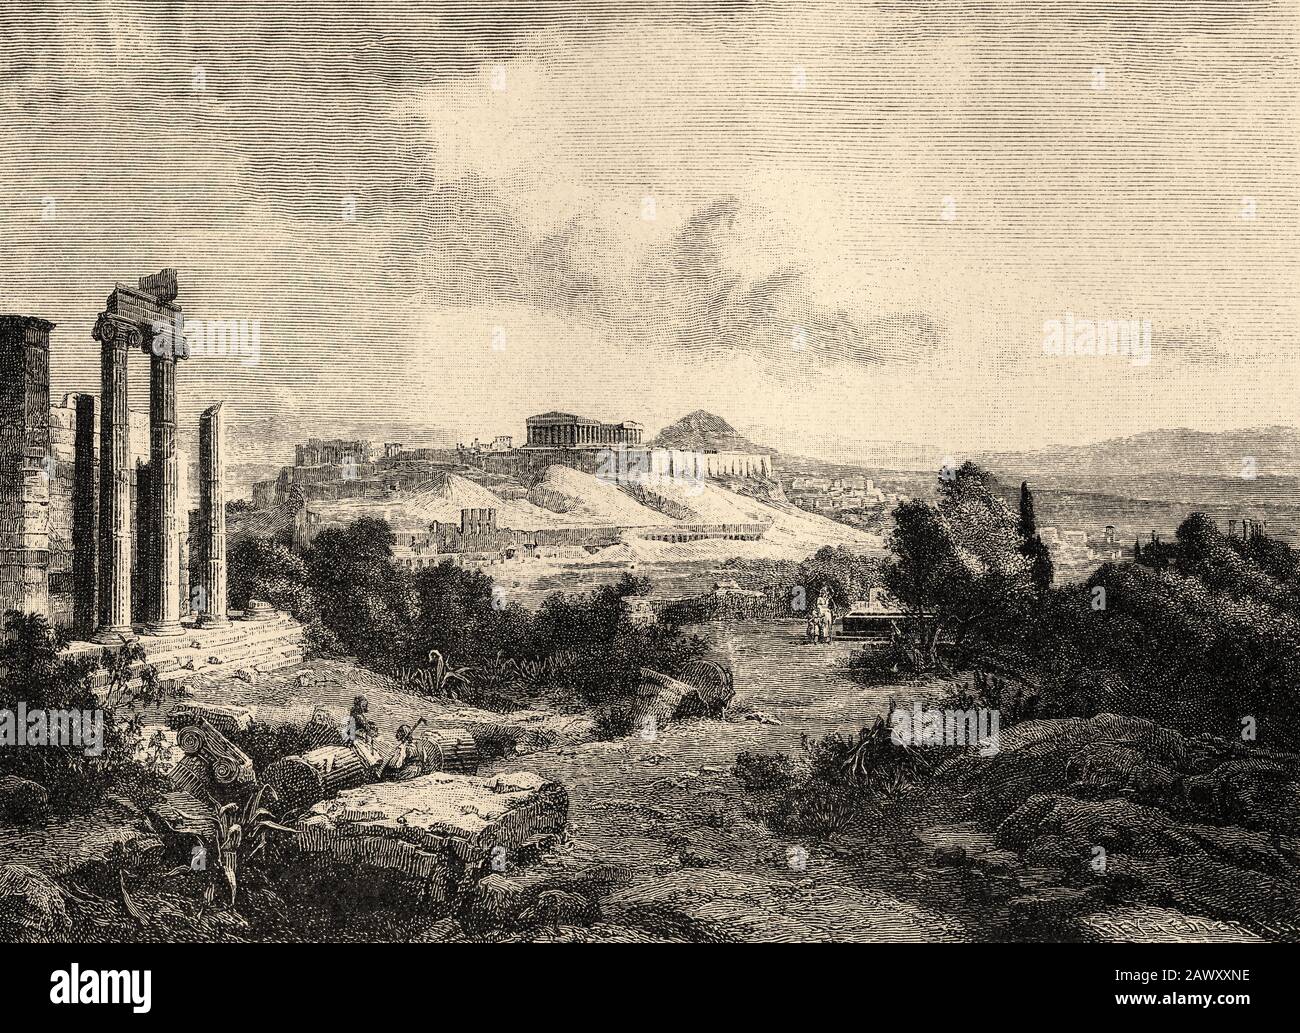 Athens and the Acropolis in 1800, 19th century. Greece ancient history. Old engraving illustration from the book Universal history by Oscar Jager 1890 Stock Photo